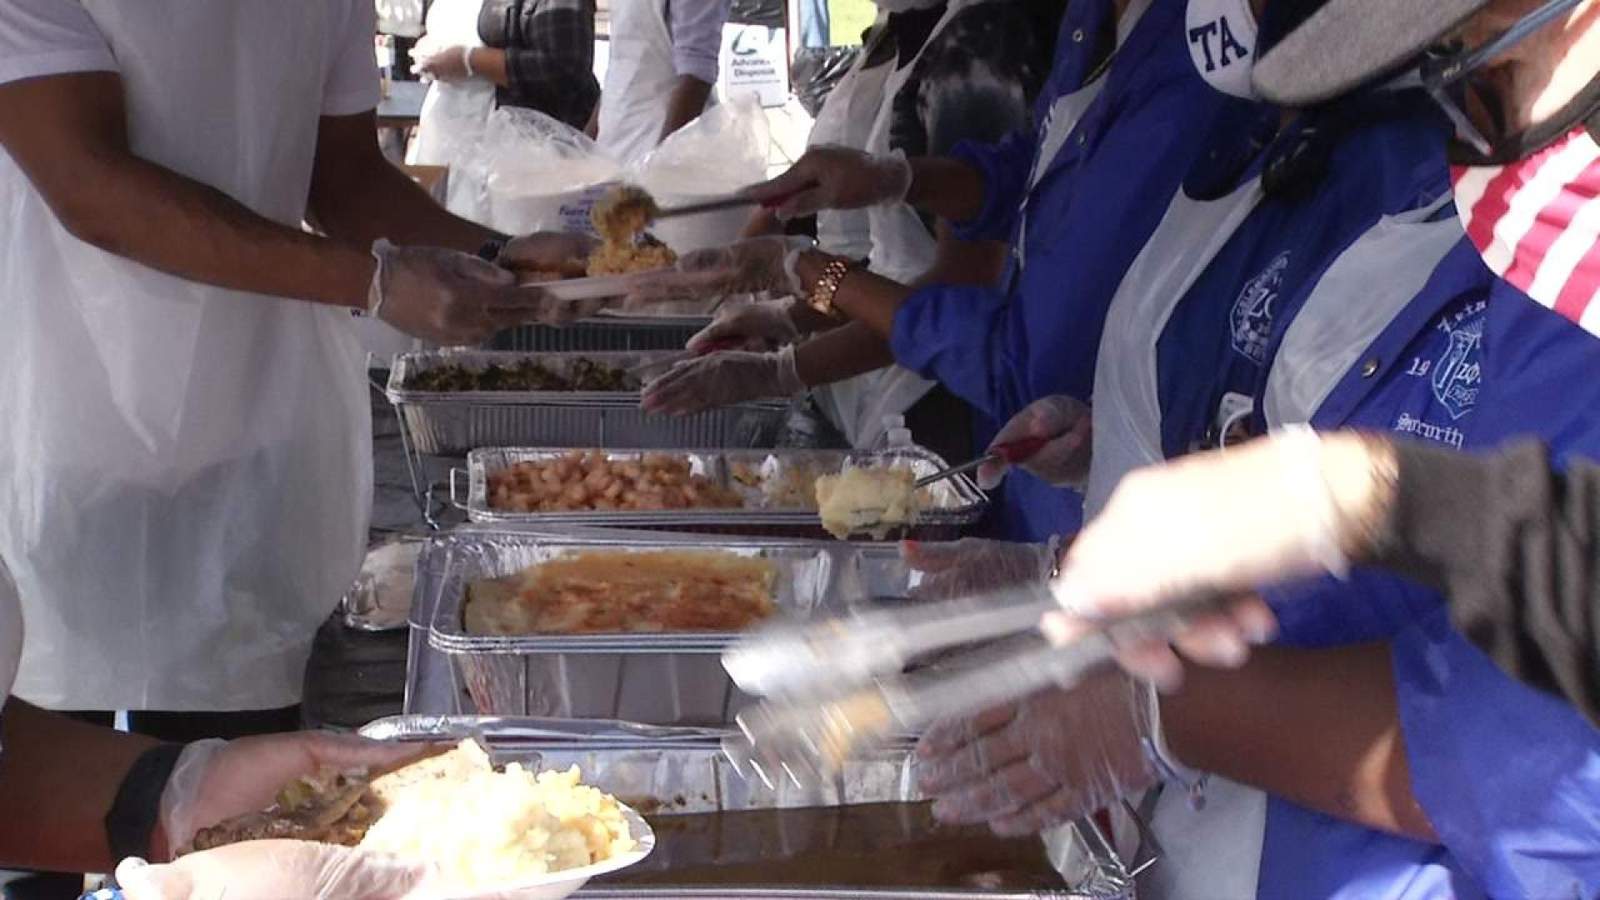 Clara White Mission feeds hundreds at outdoor pre-Thanksgiving luncheon